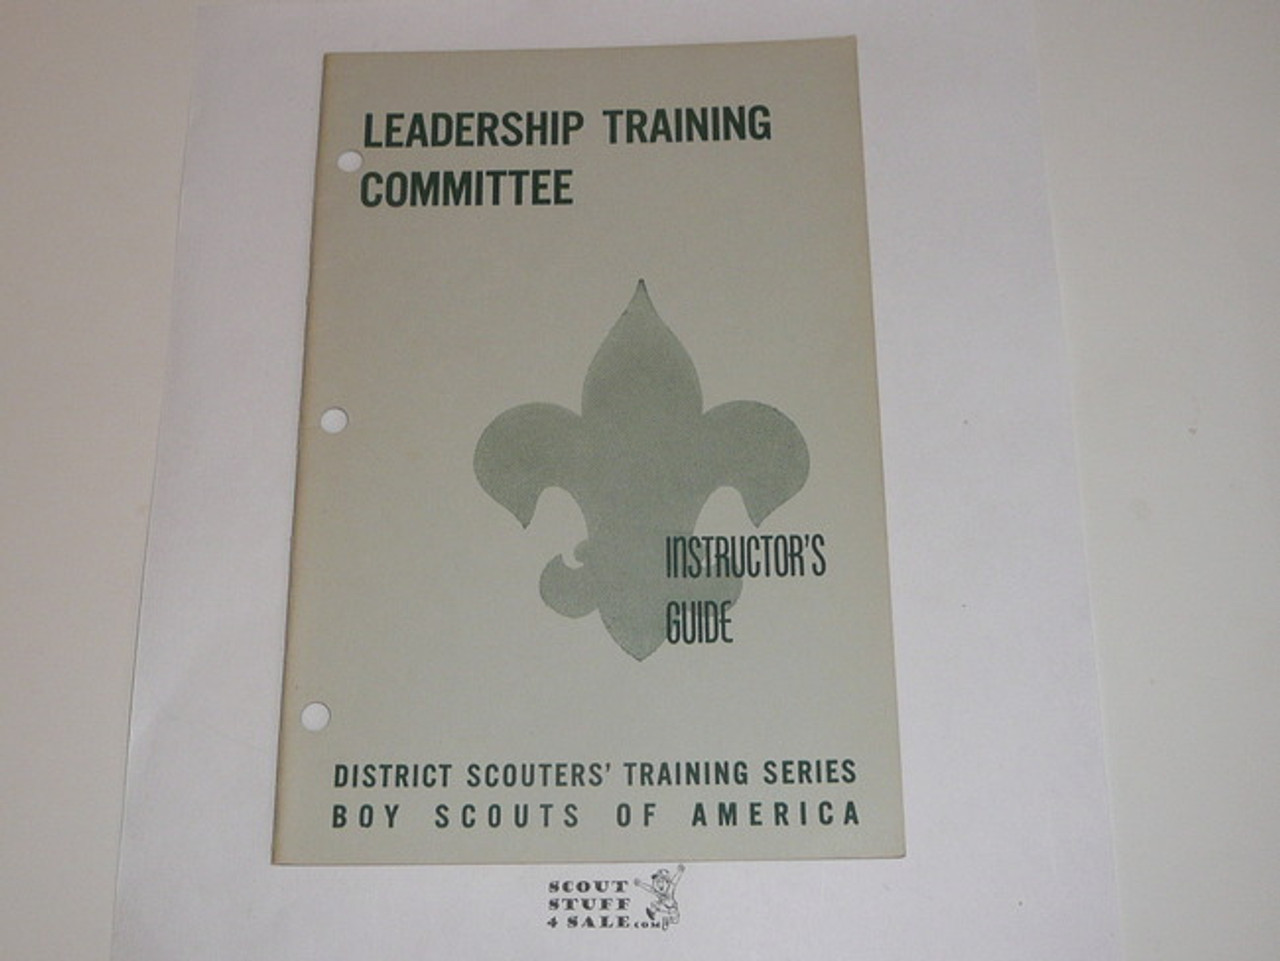 District Scouter's Training Series, Leadership Training Committee Instructor's Guide, 8-61 printing